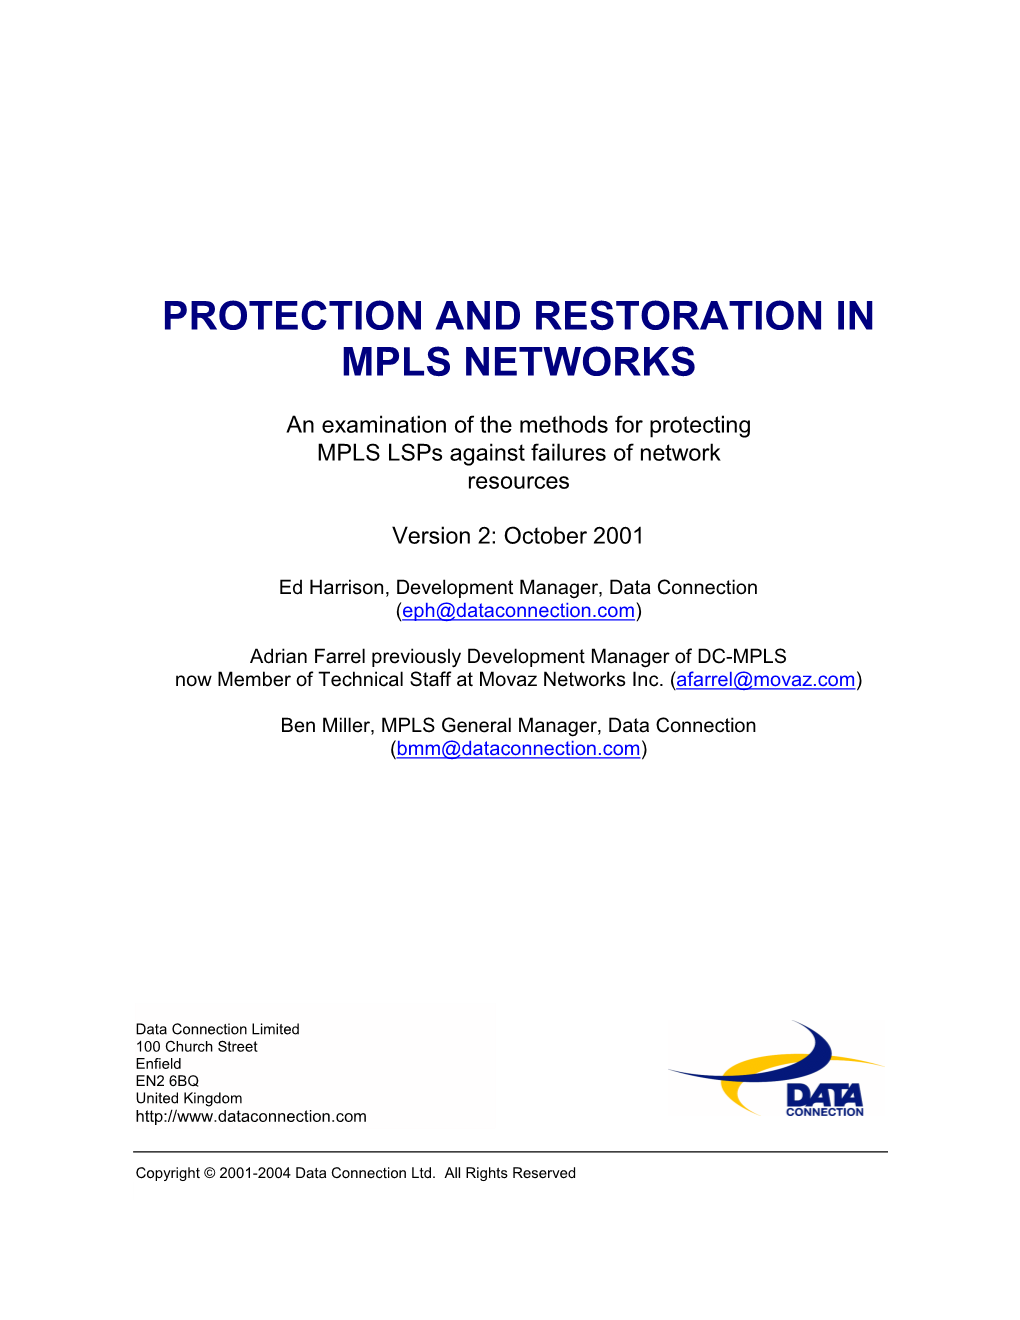 Protection and Restoration in Mpls Networks